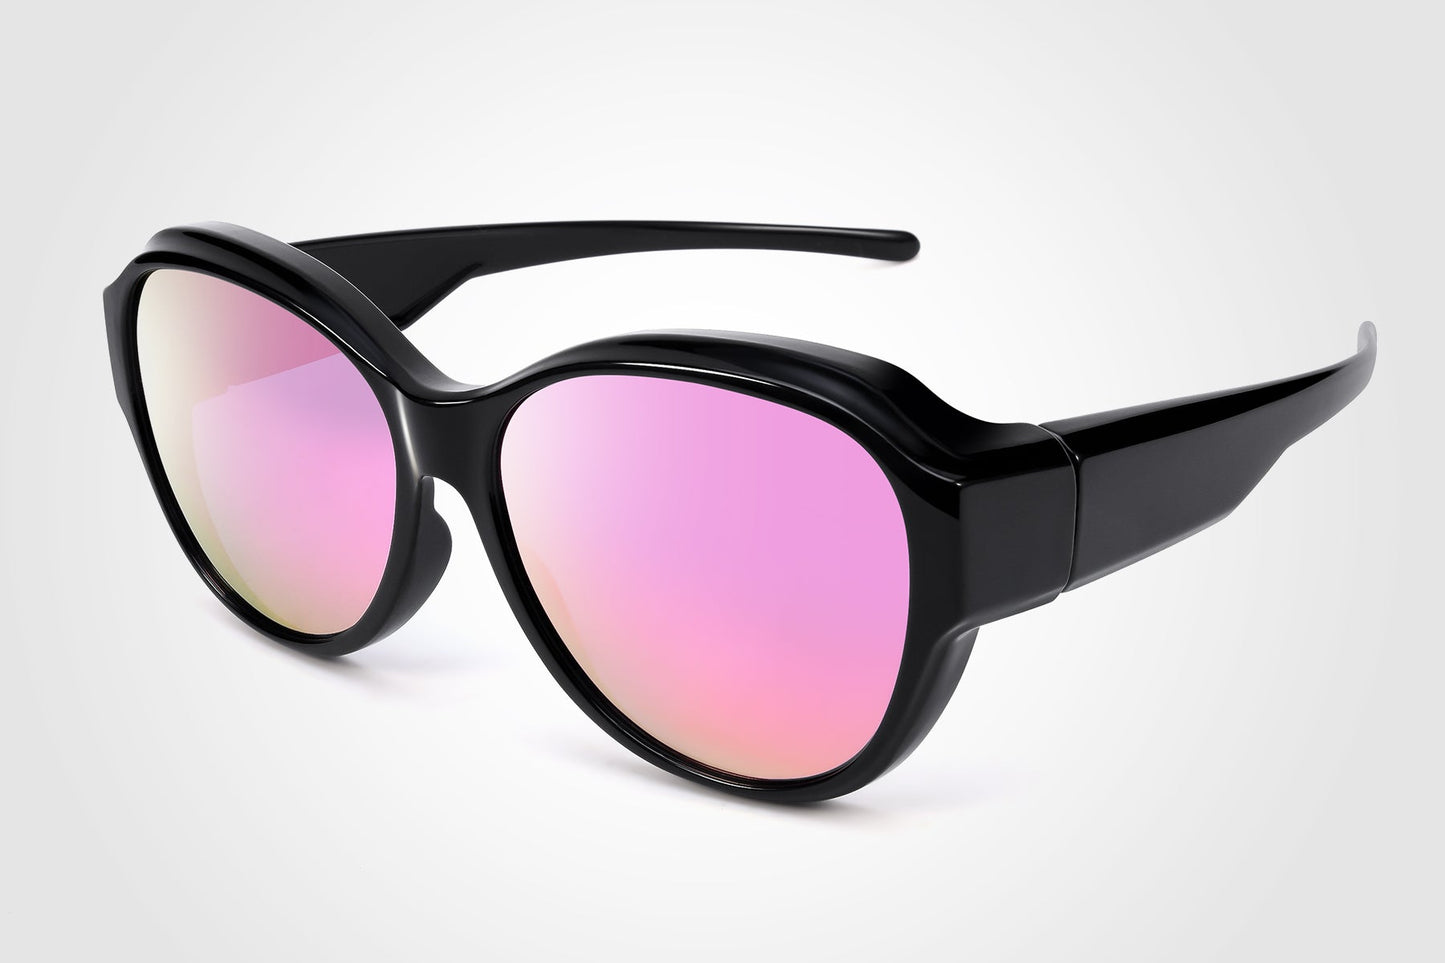 Fit over sunglasses丨Wrap around Mirrored Lens 3303